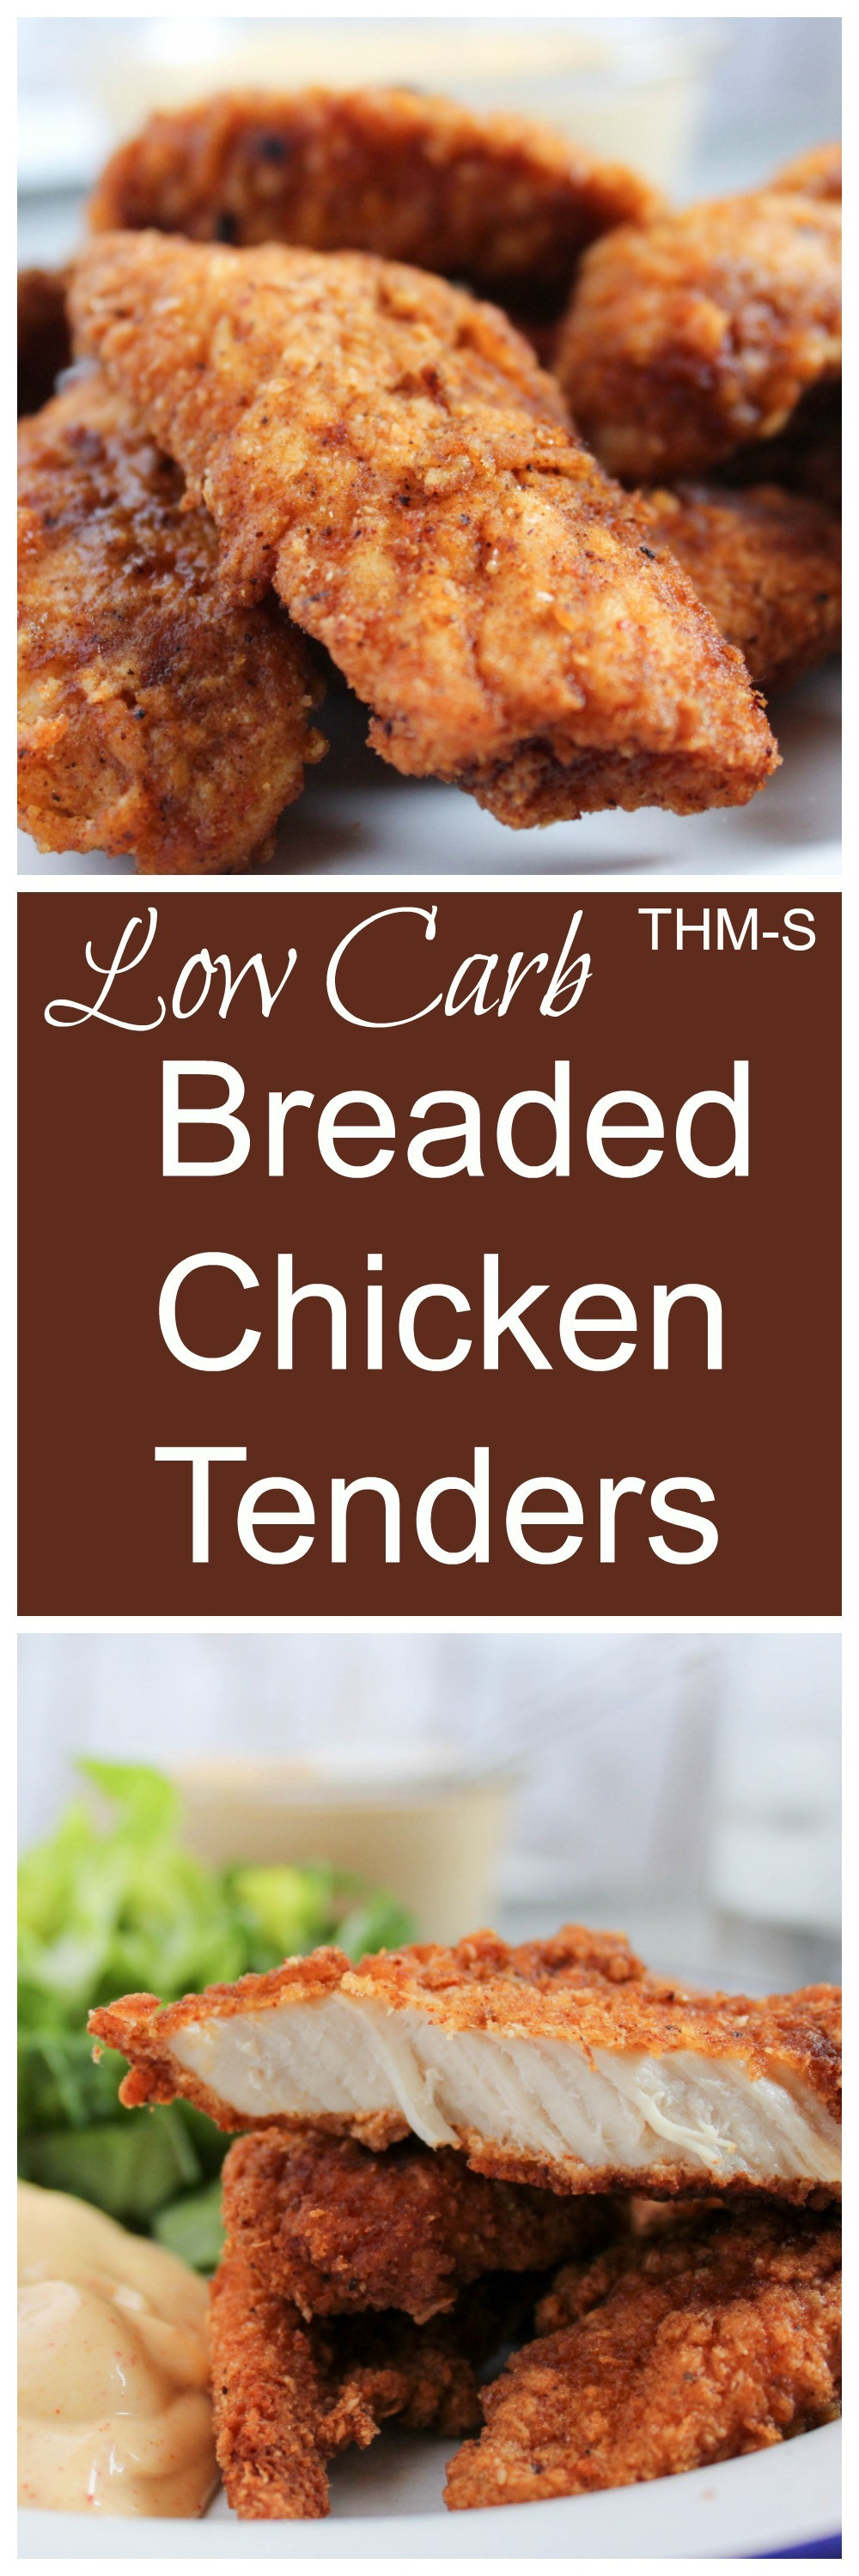 Low Carb Chicken Tenders
 Restaurant Style Breaded Chicken Tenders THM S Low Carb